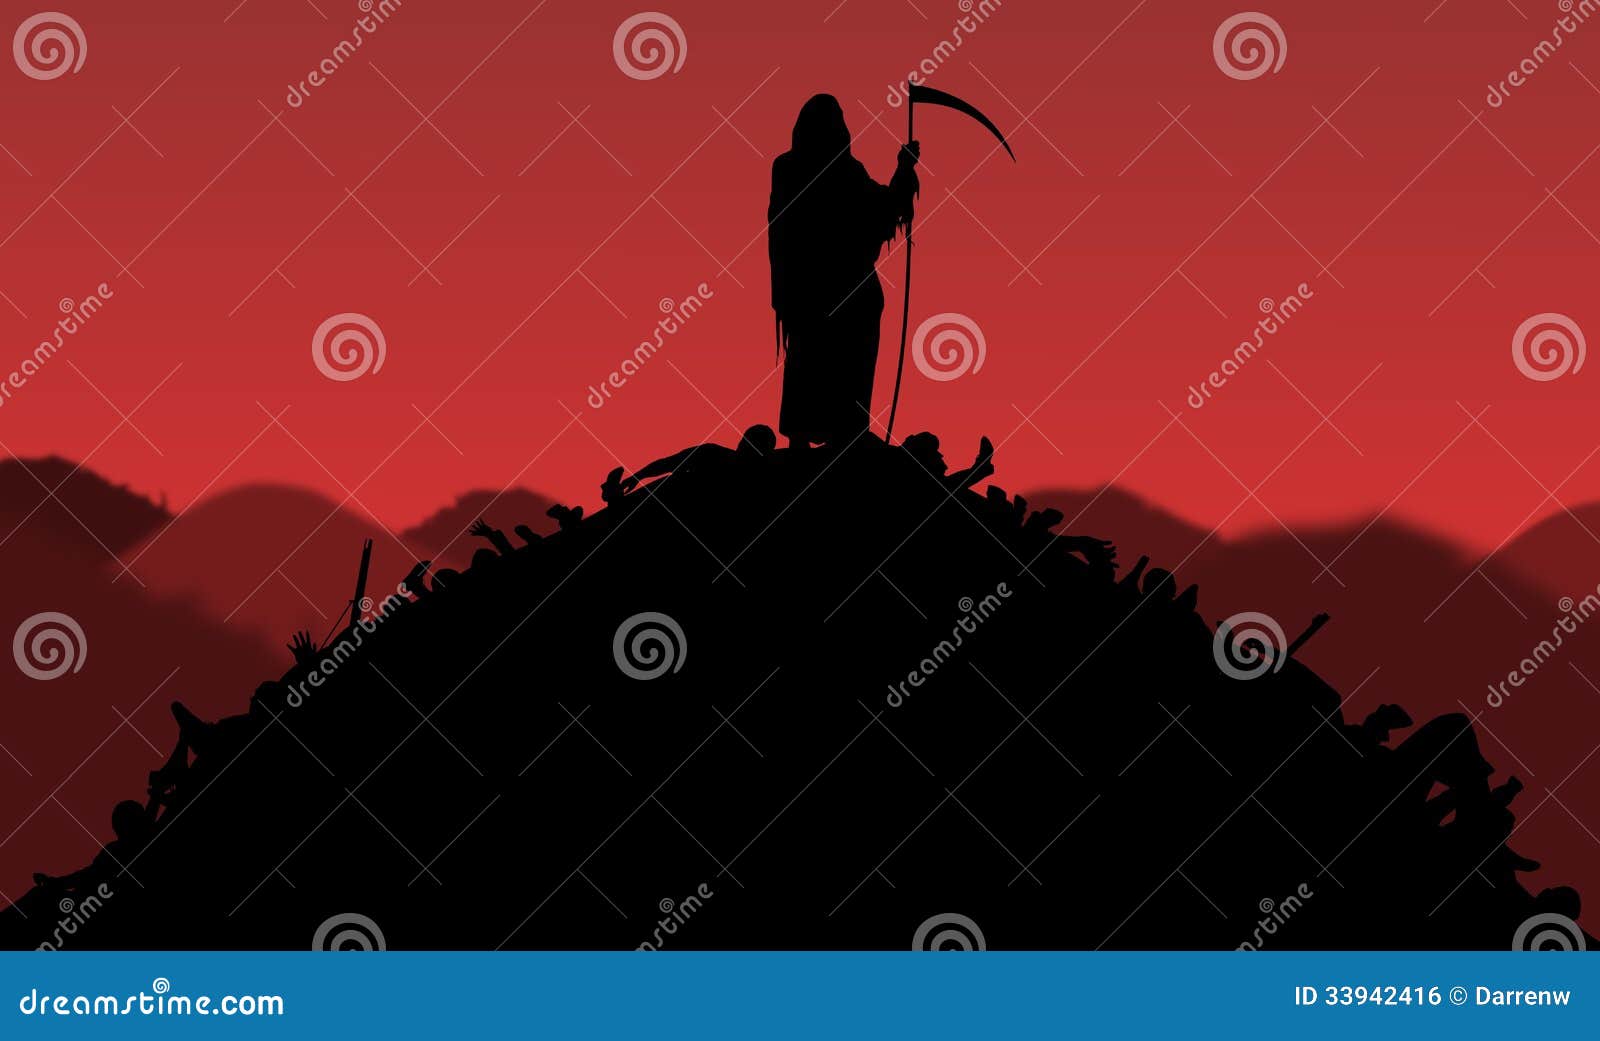 Death Pile Royalty Free Stock Image - Image: 33942416